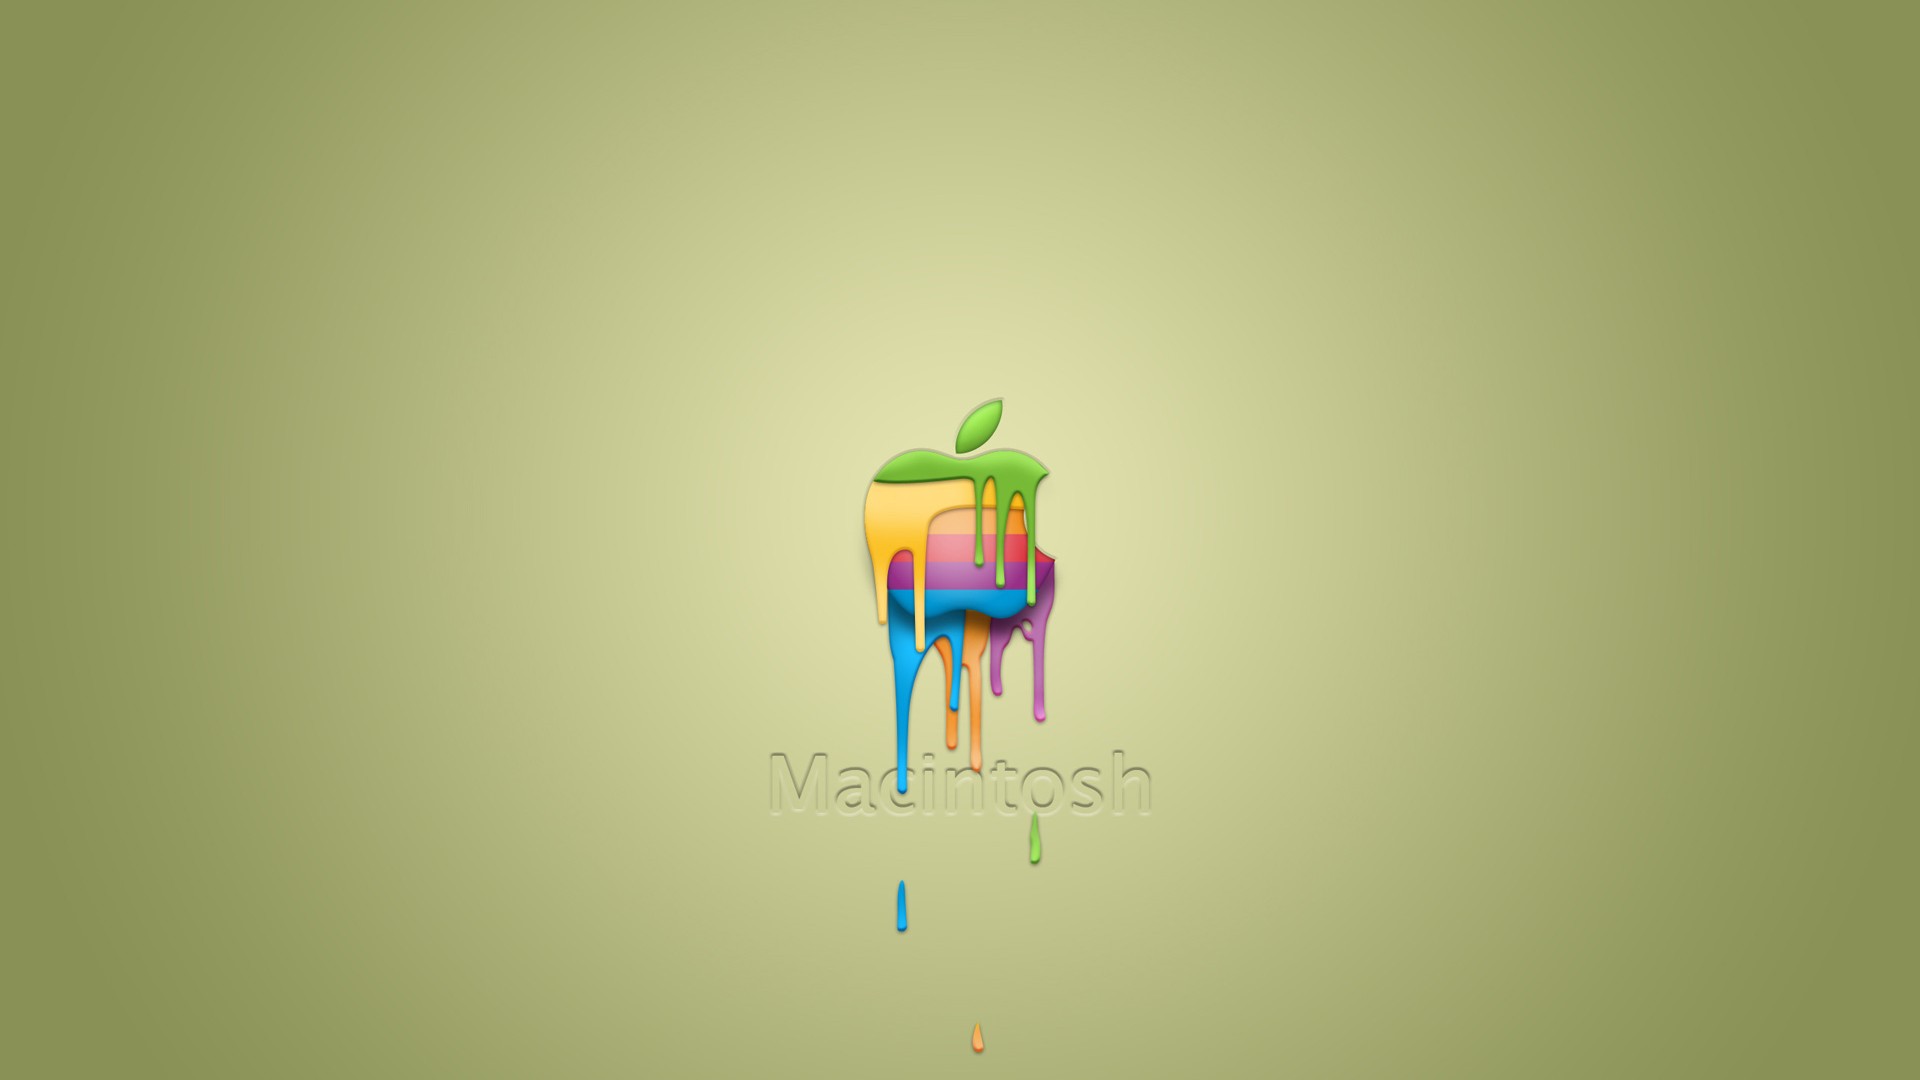 Wallpapers hd for mac